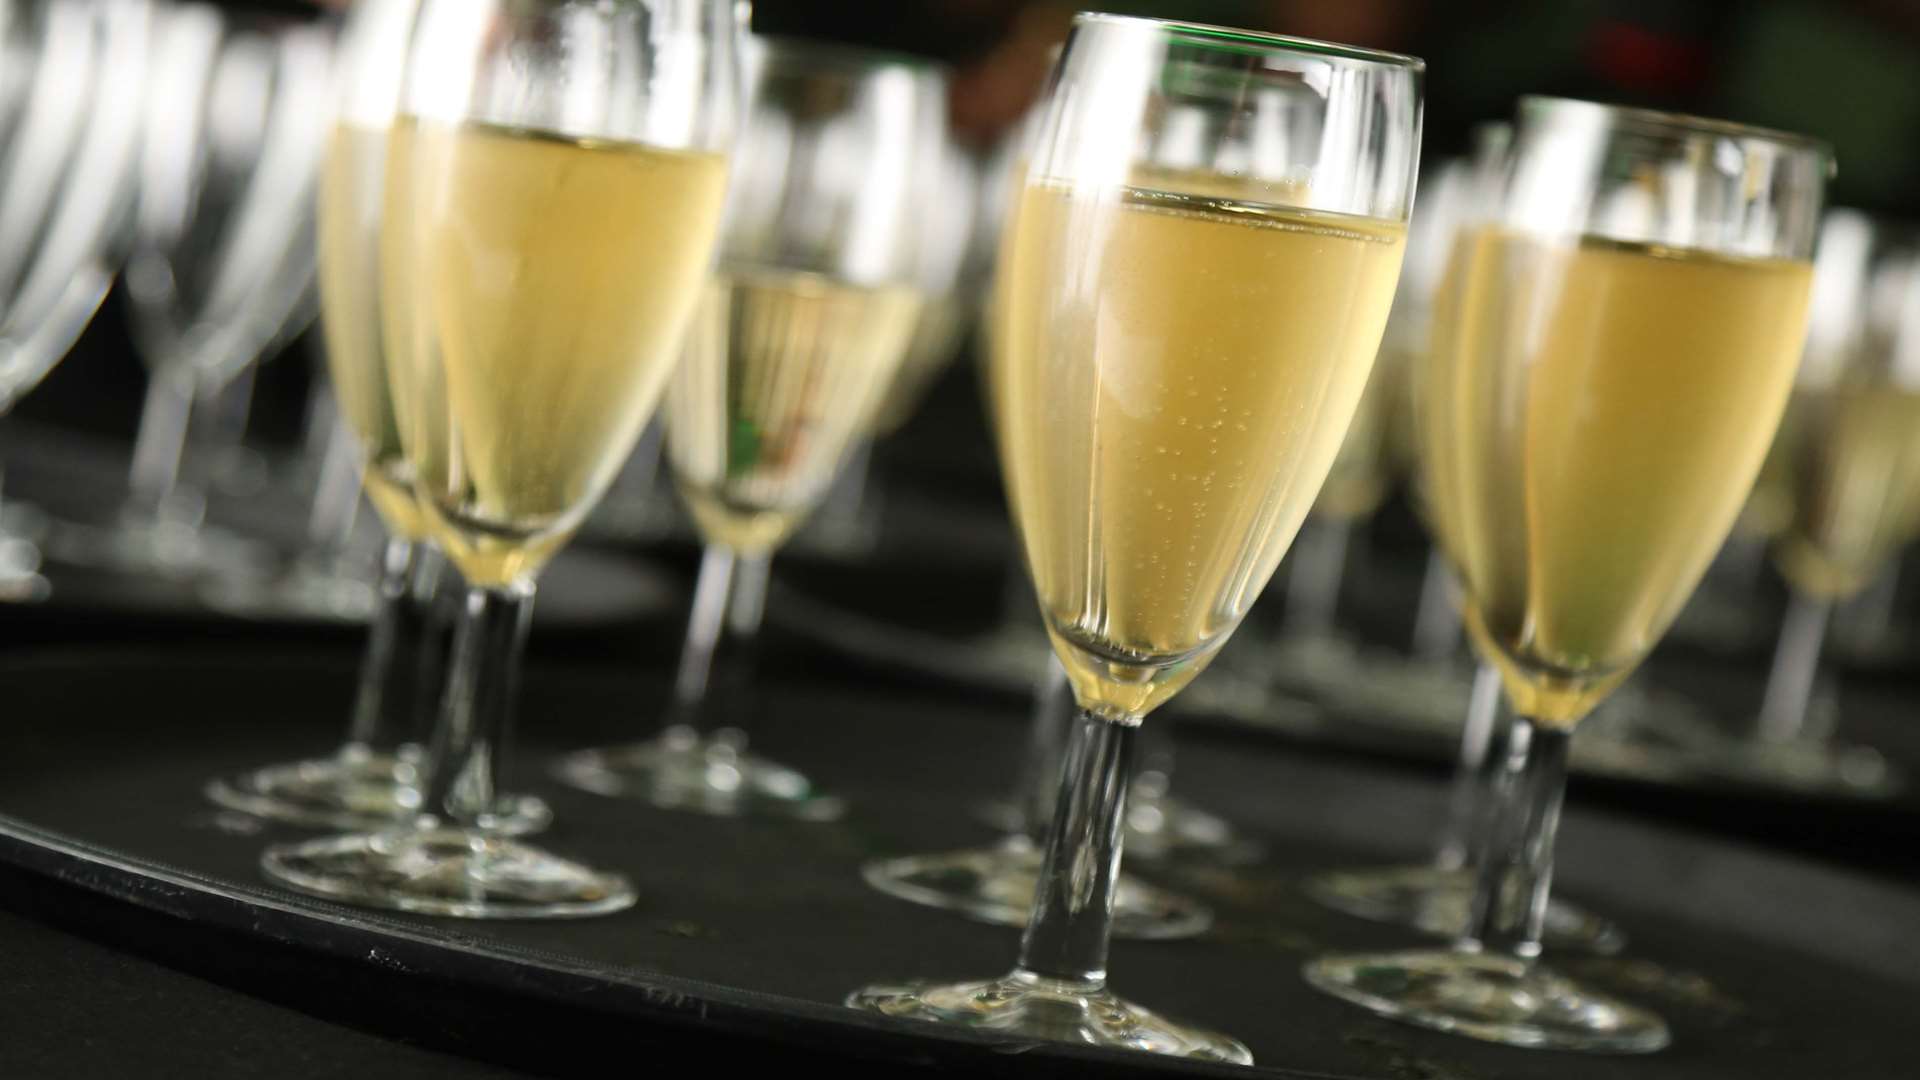 Champagne was served to the 46 finalists